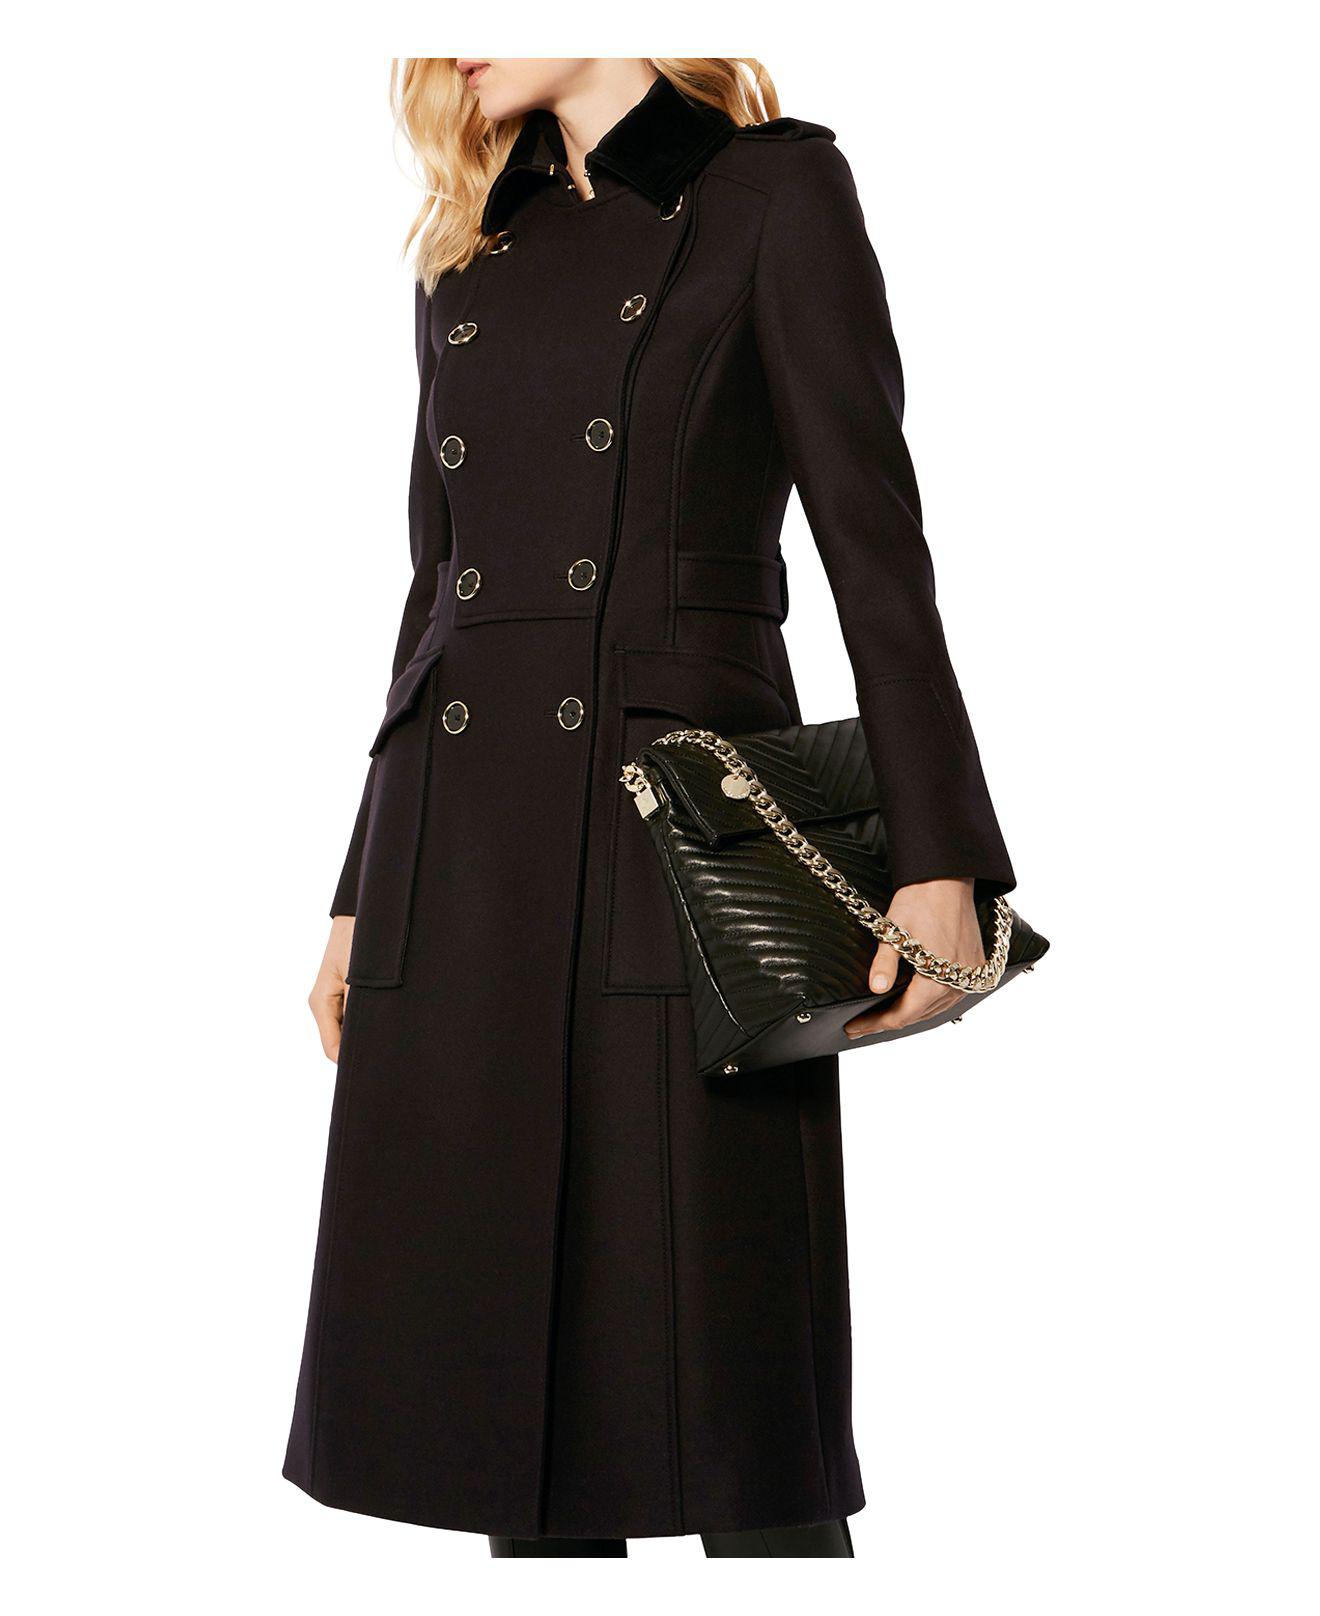 Karen Millen Double-breasted Military-style Coat in Navy (Blue) - Lyst